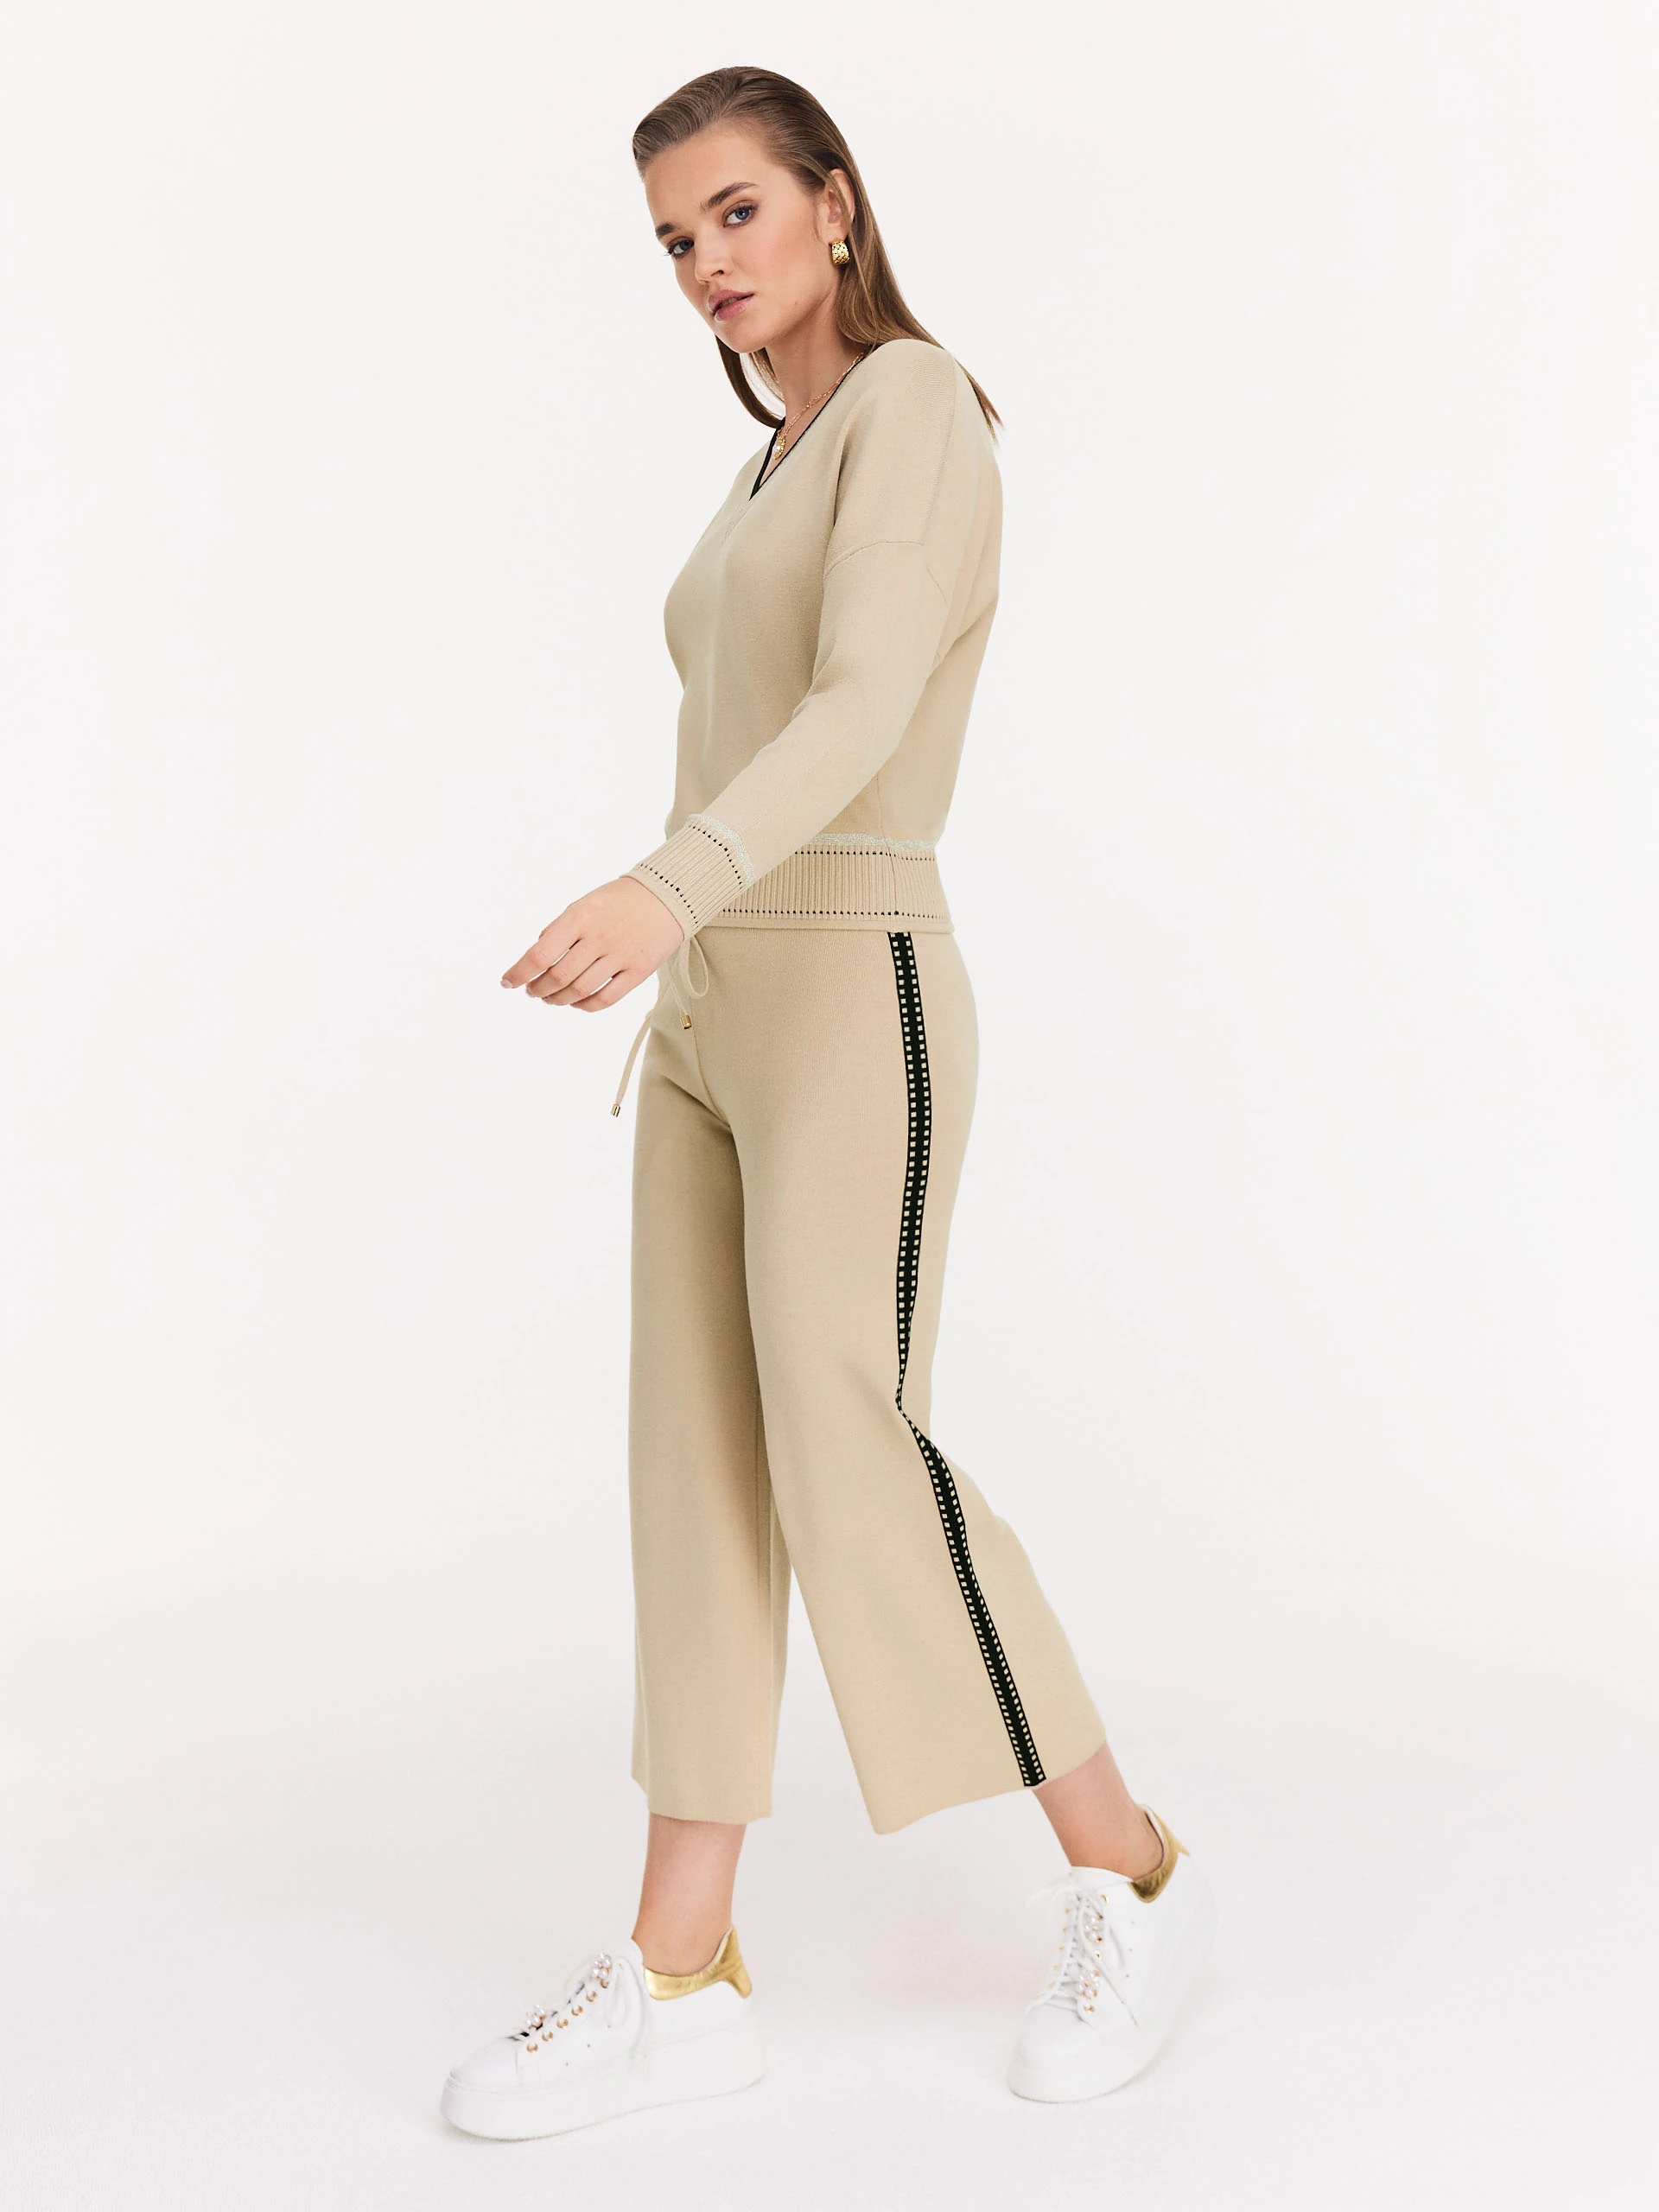 Beige high-waisted pants with piping -Taranko